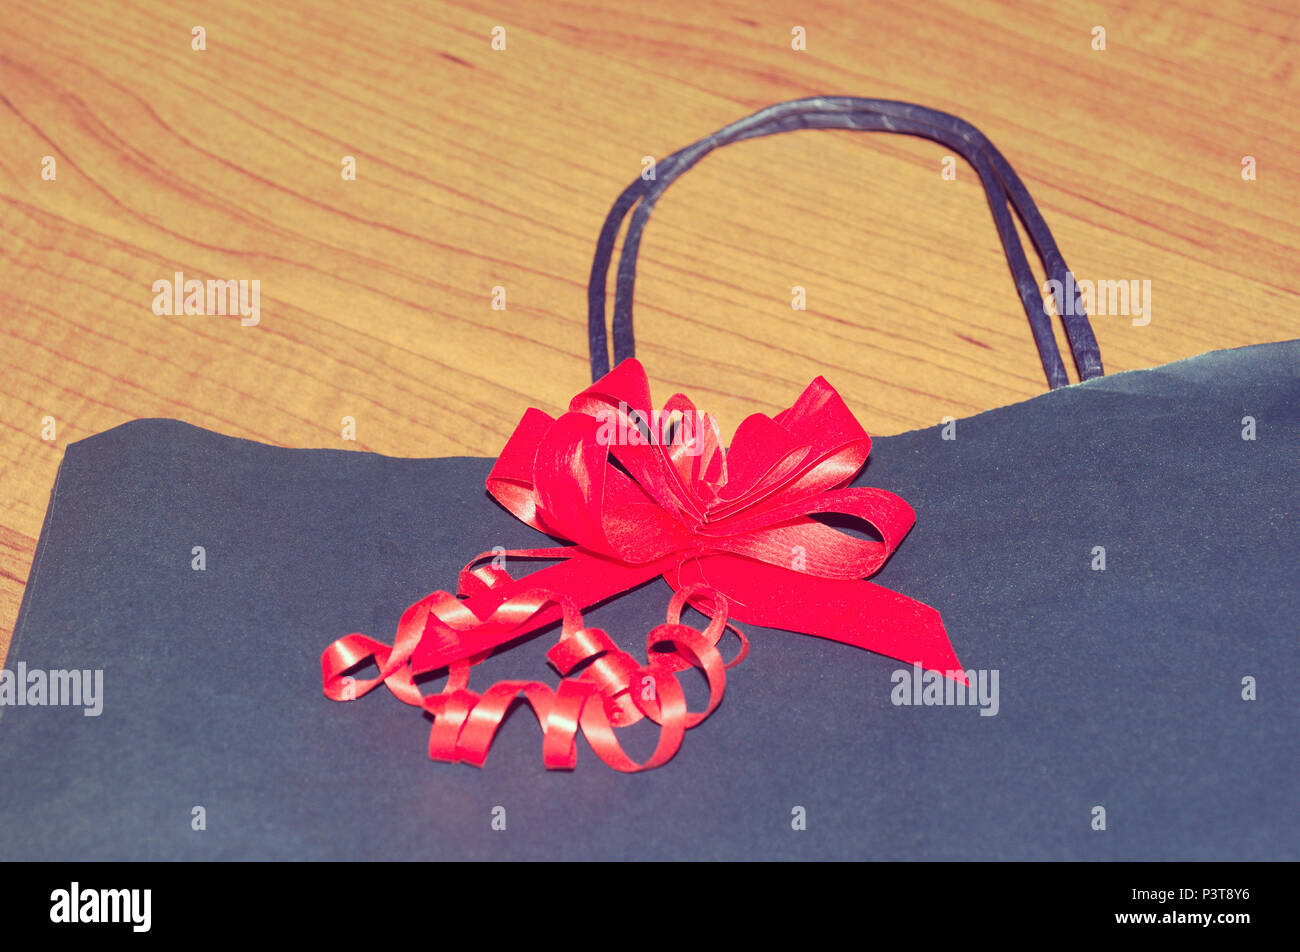 red ribbon on gift paper bag lying on wooden floor Stock Photo